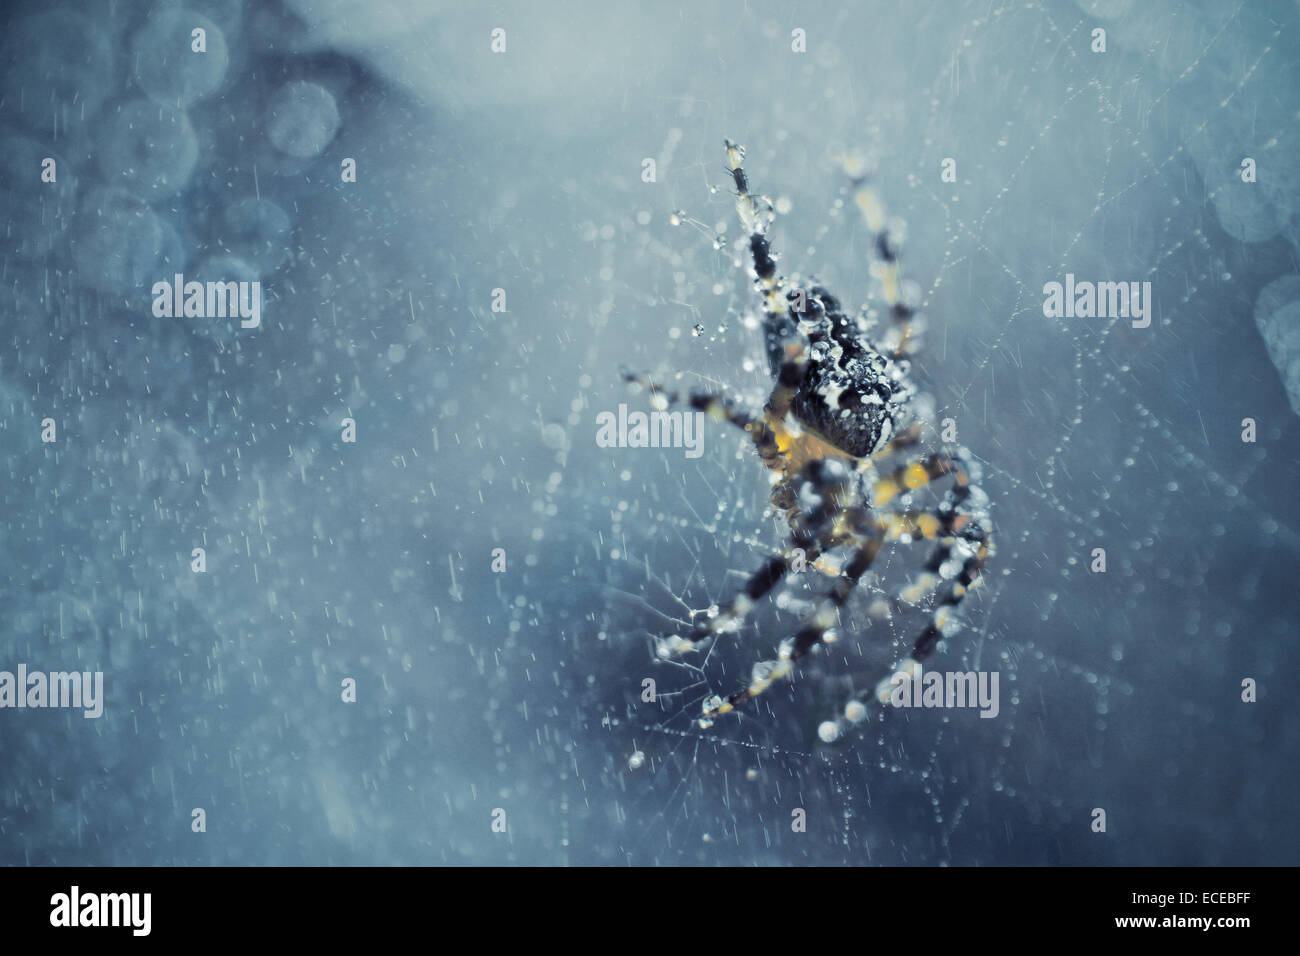 Close-up of spider in a web Stock Photo